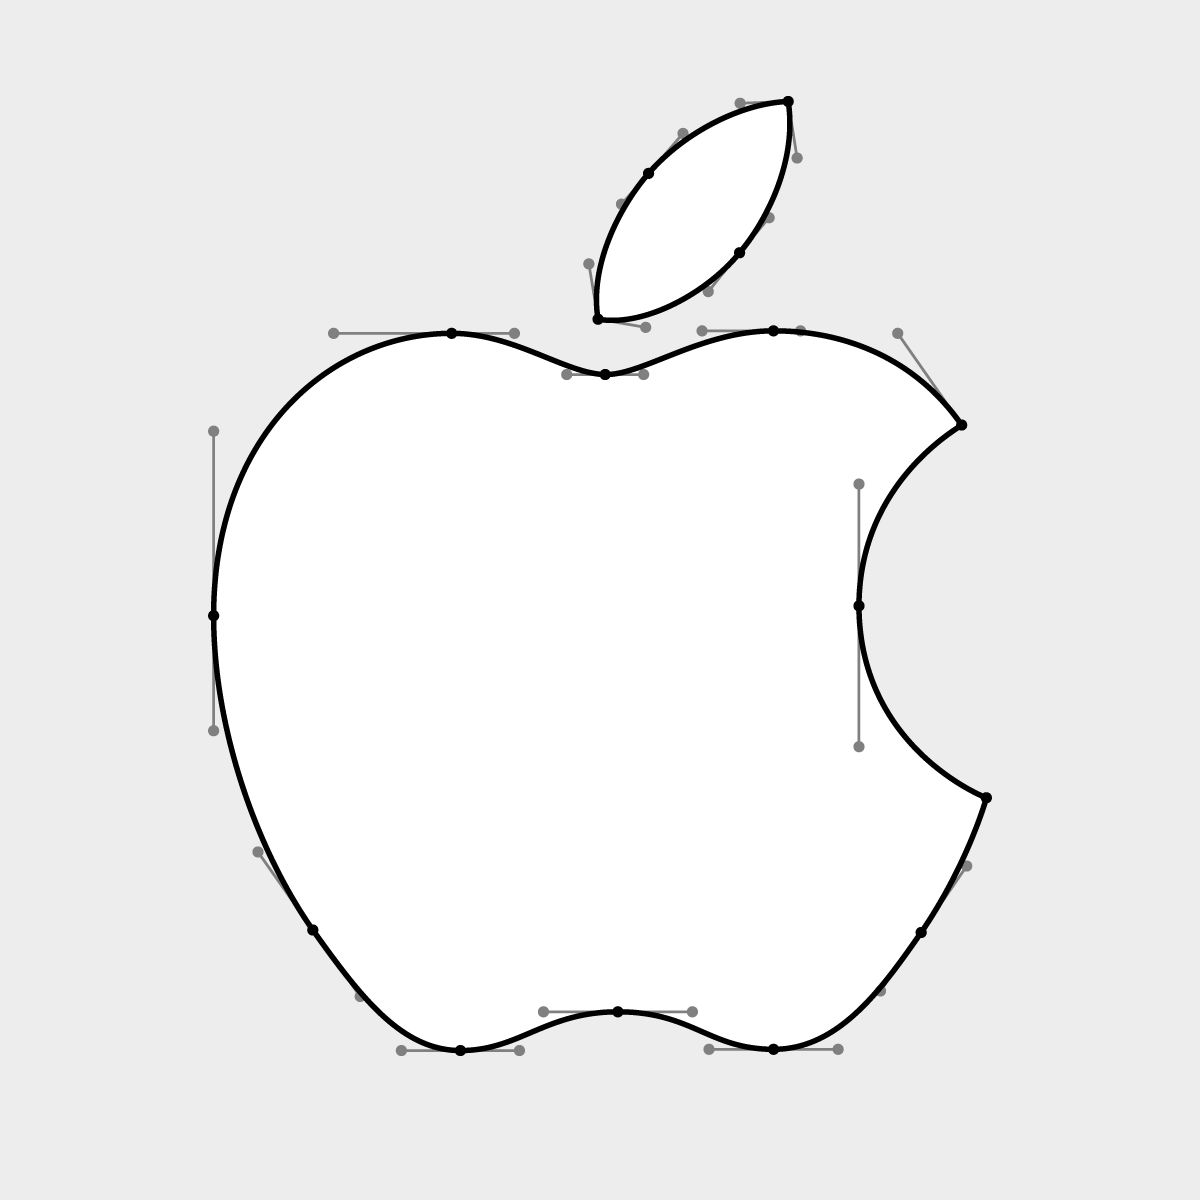 The Apple logo shown as a sequence of curved lines between plotted points. From each point on the curve, straight lines are drawn connecting to additional points.